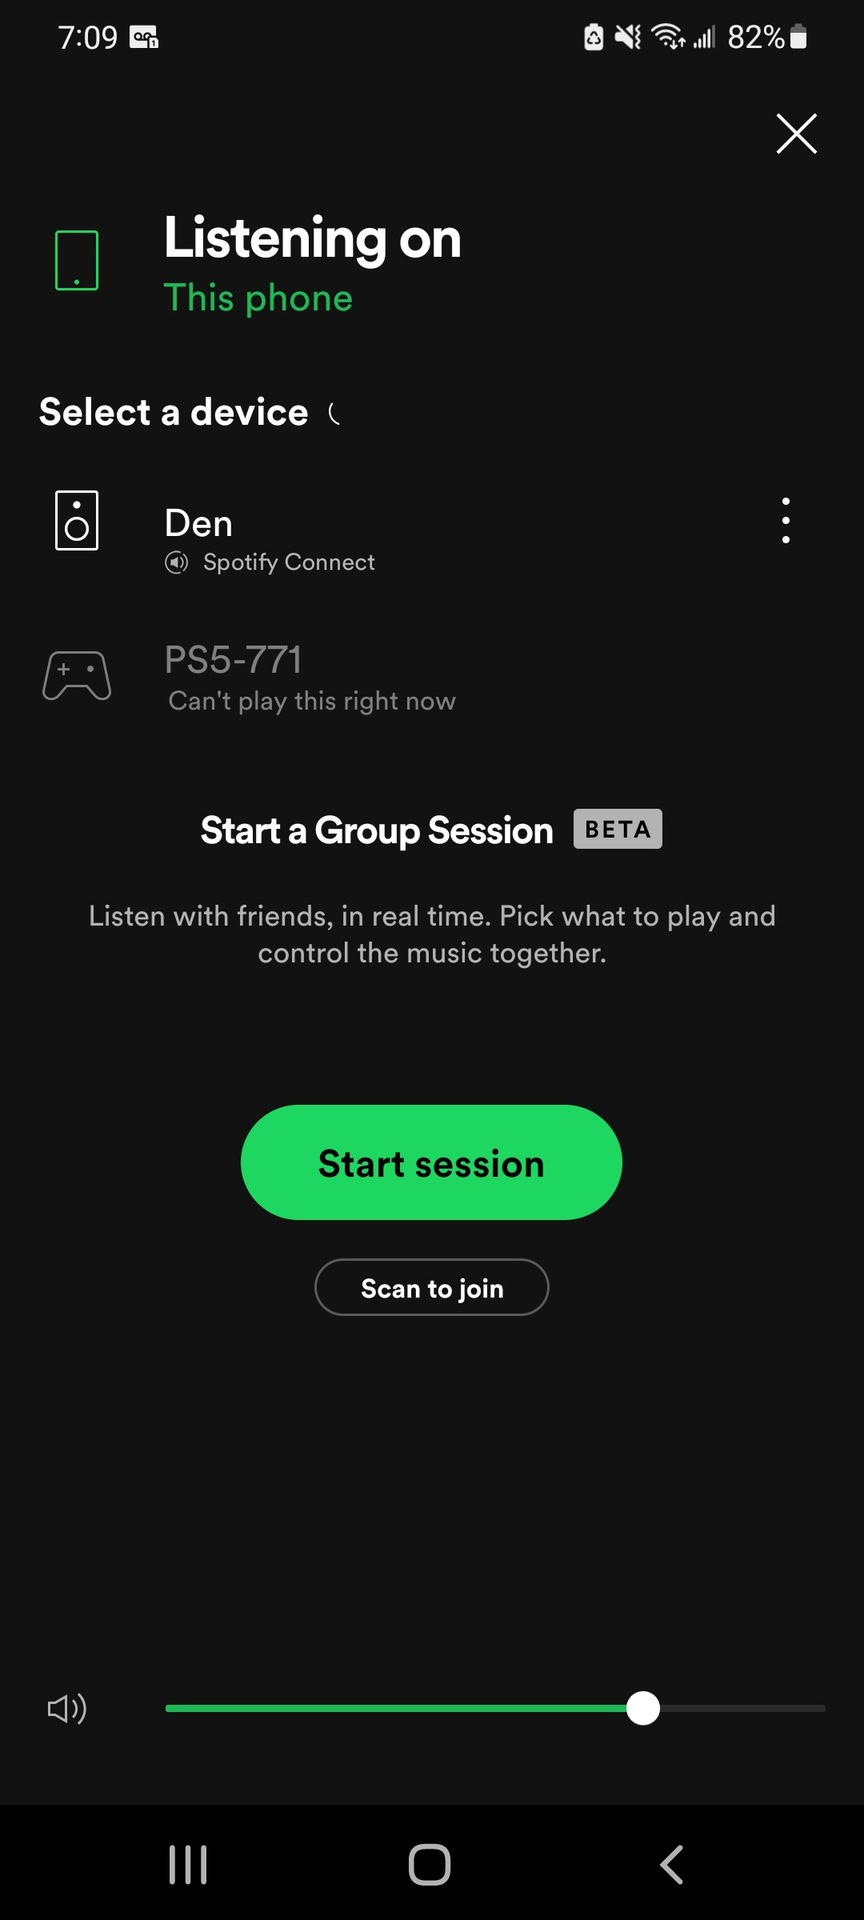 how-do-i-use-spotify-connect